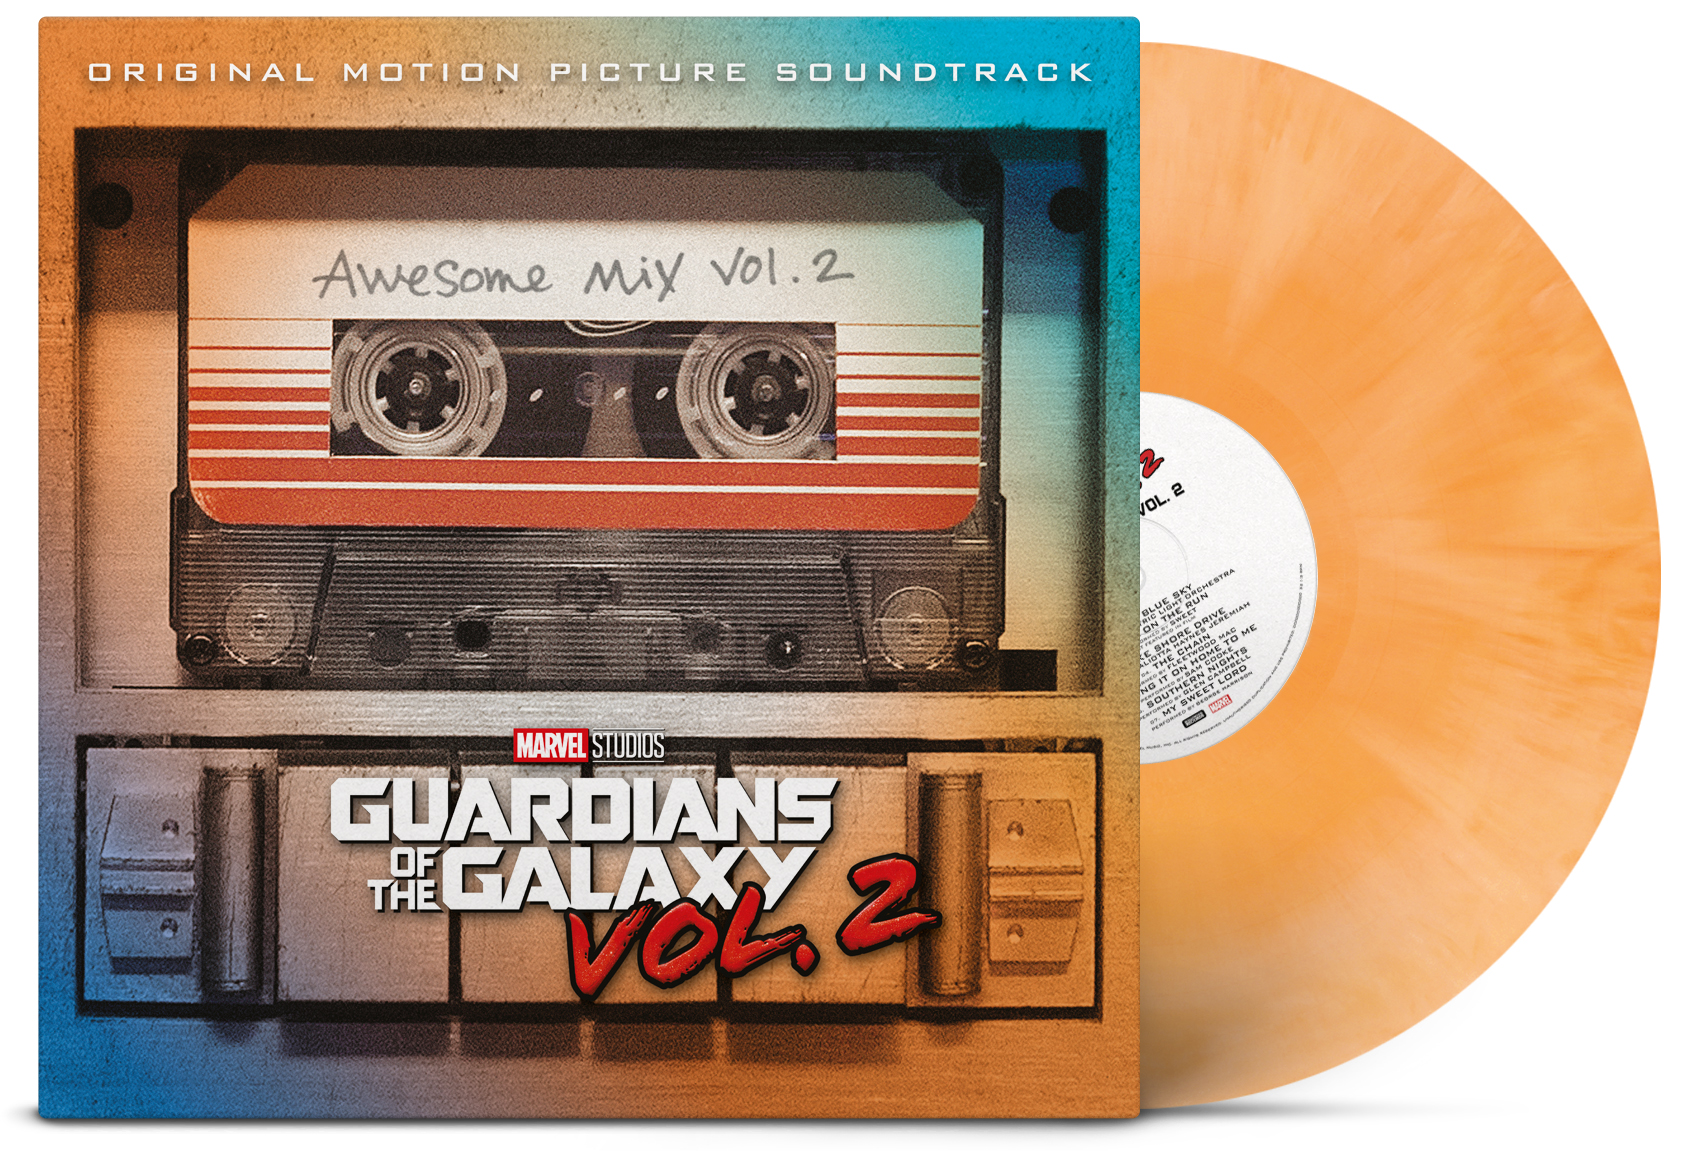 CD Shop - SOUNDTRACK Guardians of the Galaxy Vol. 2: Awesome Mix Vol. 2